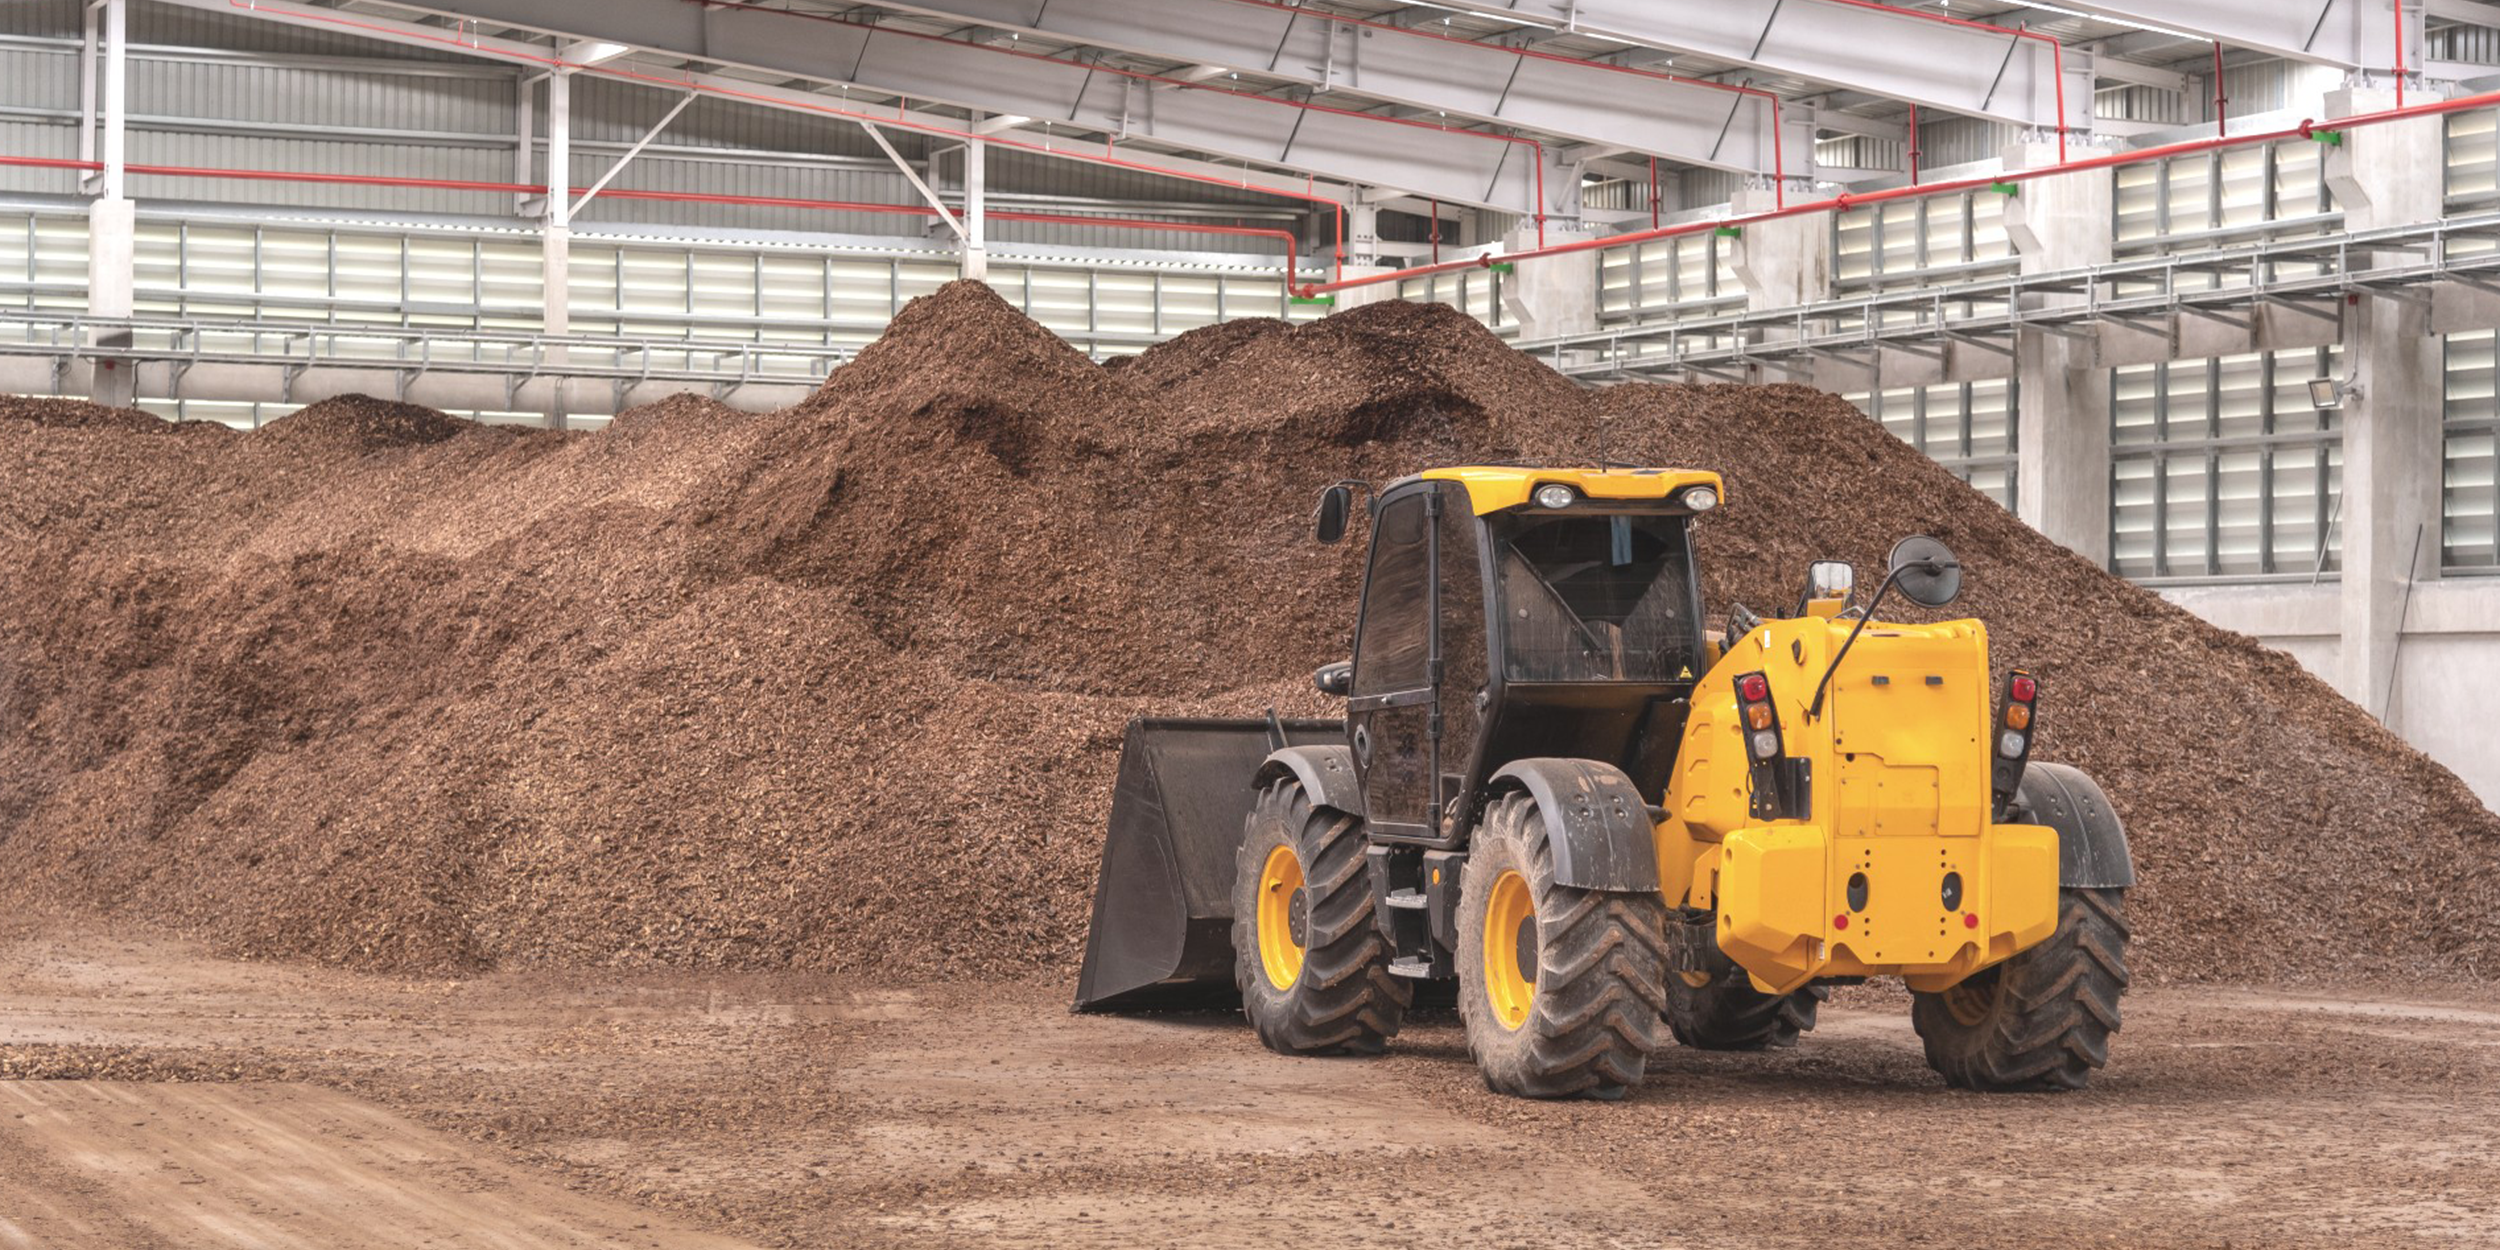 Fuel Quality is coming to the Biomass Suppliers List